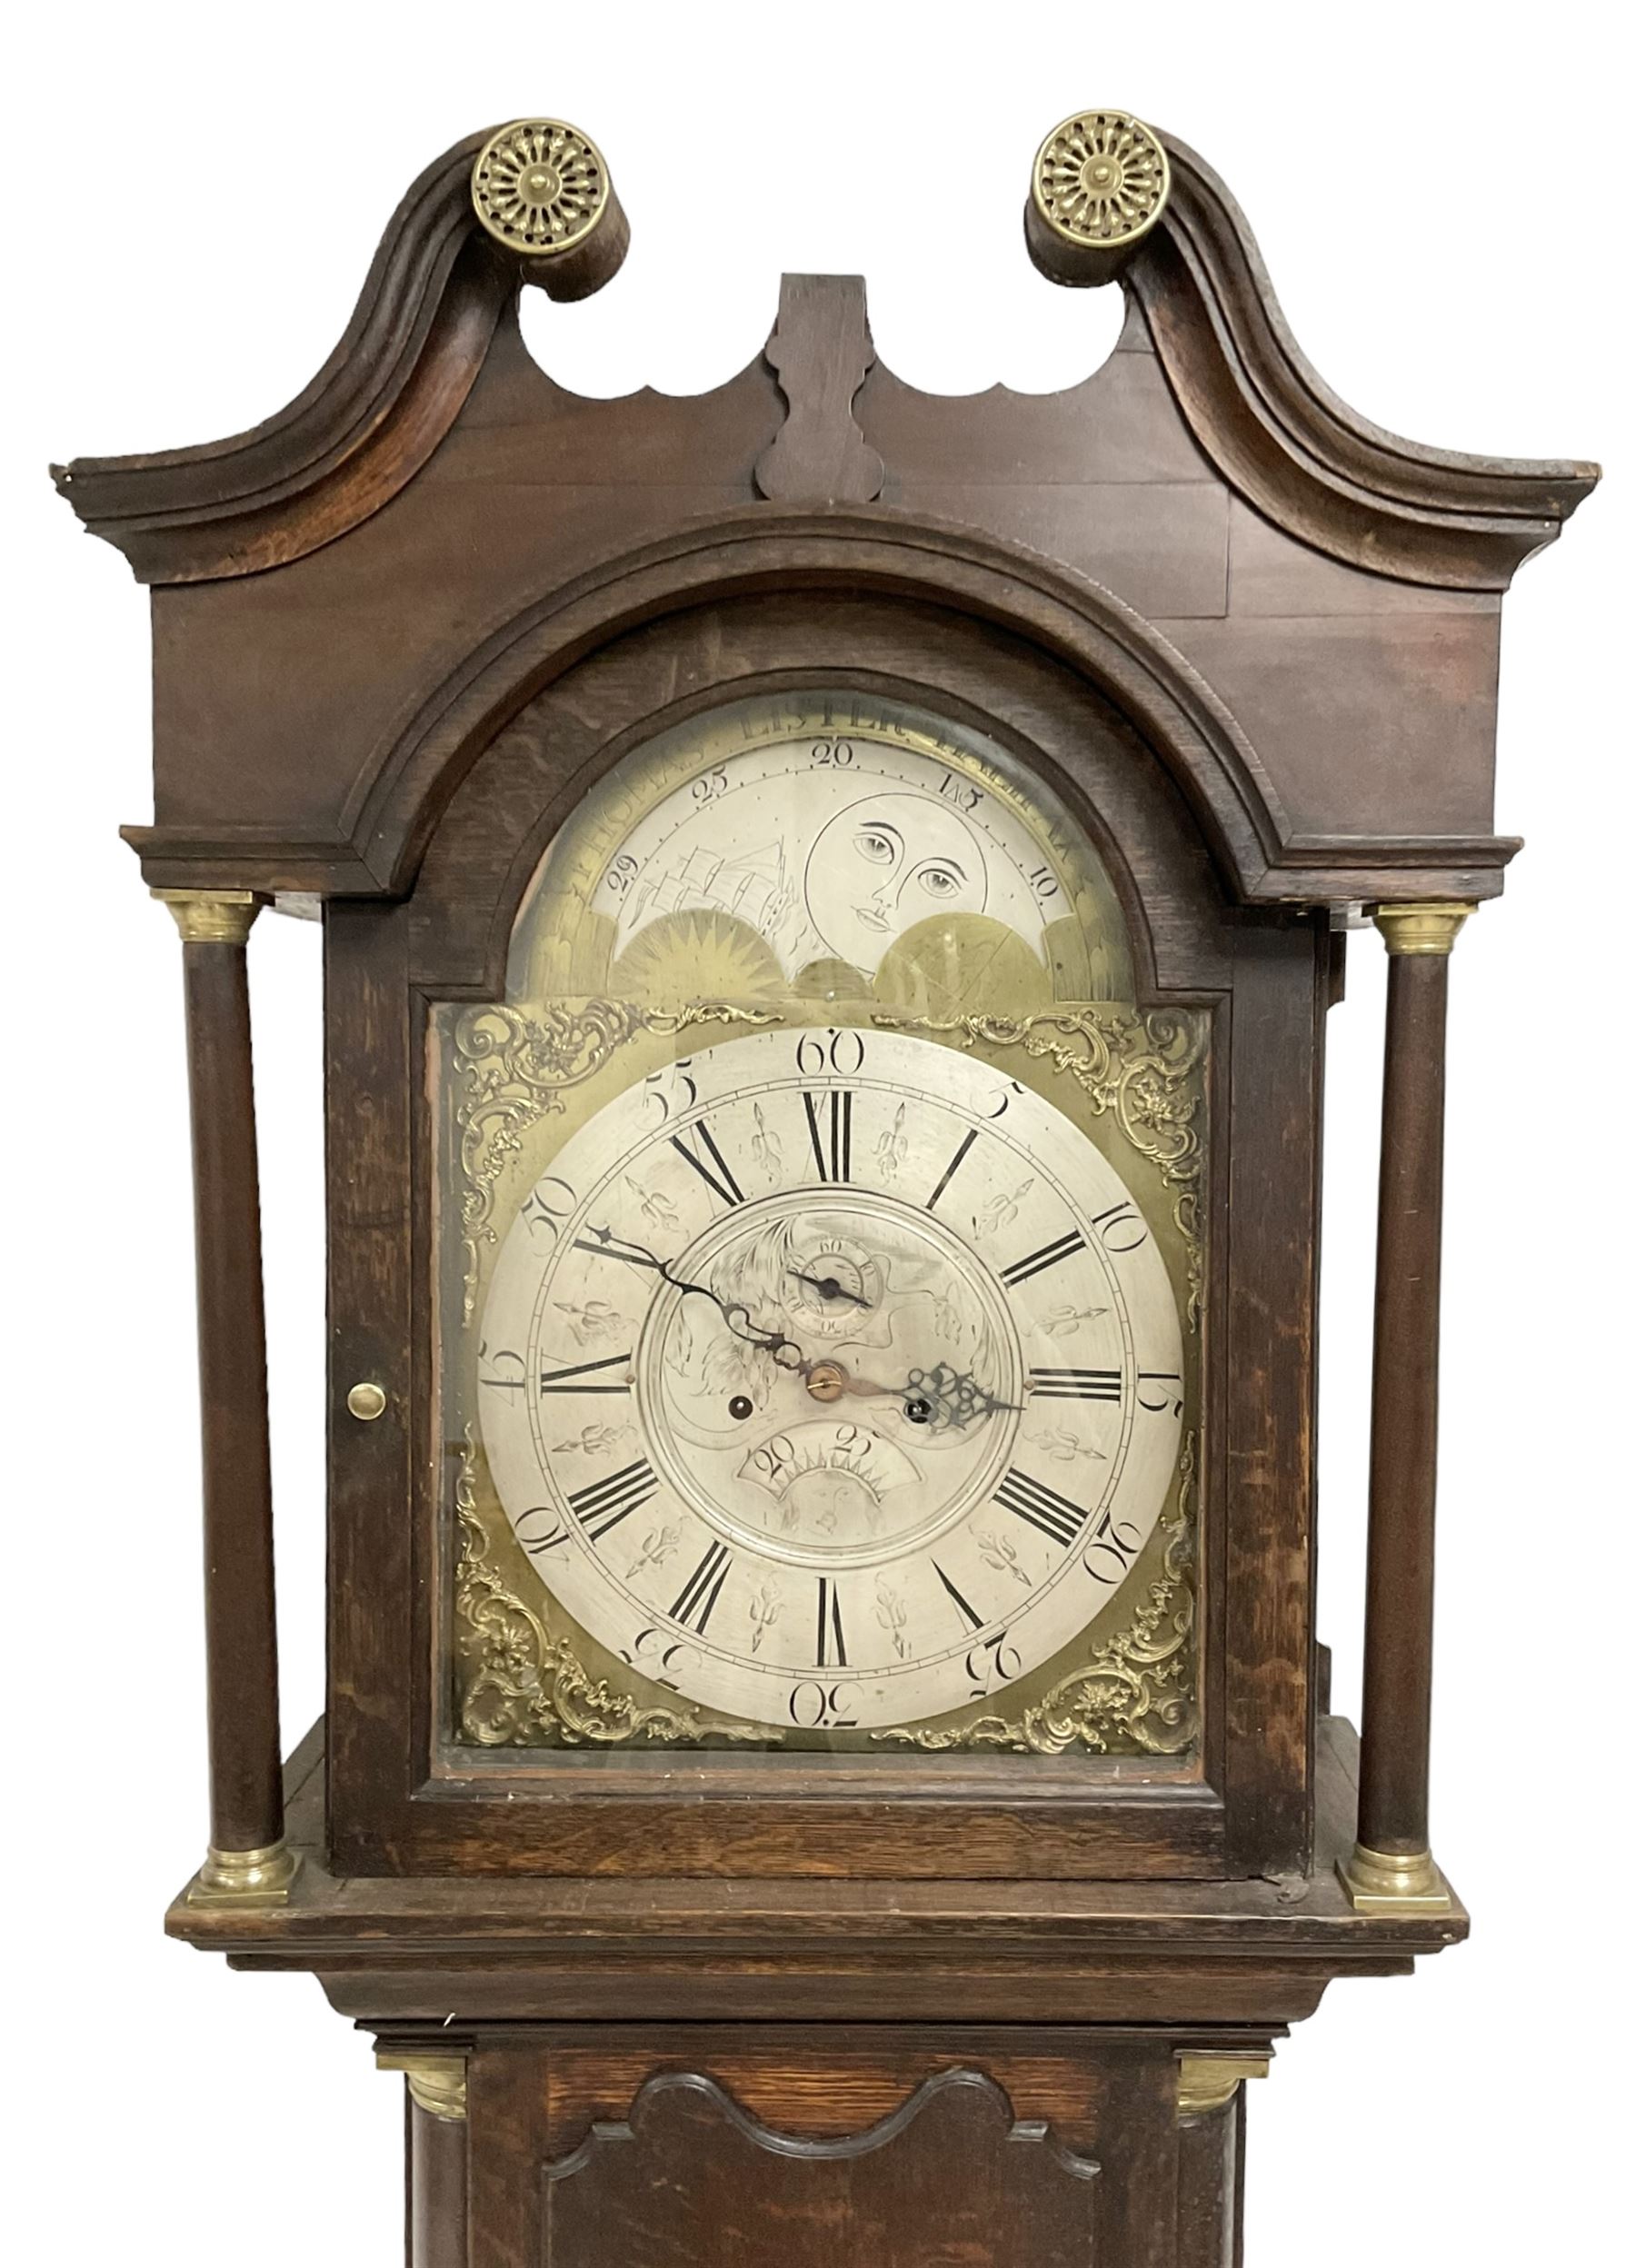 Thomas Lister of Halifax - Late 18th century oak cased 8-day longcase clock with a swans neck pedime - Image 2 of 6